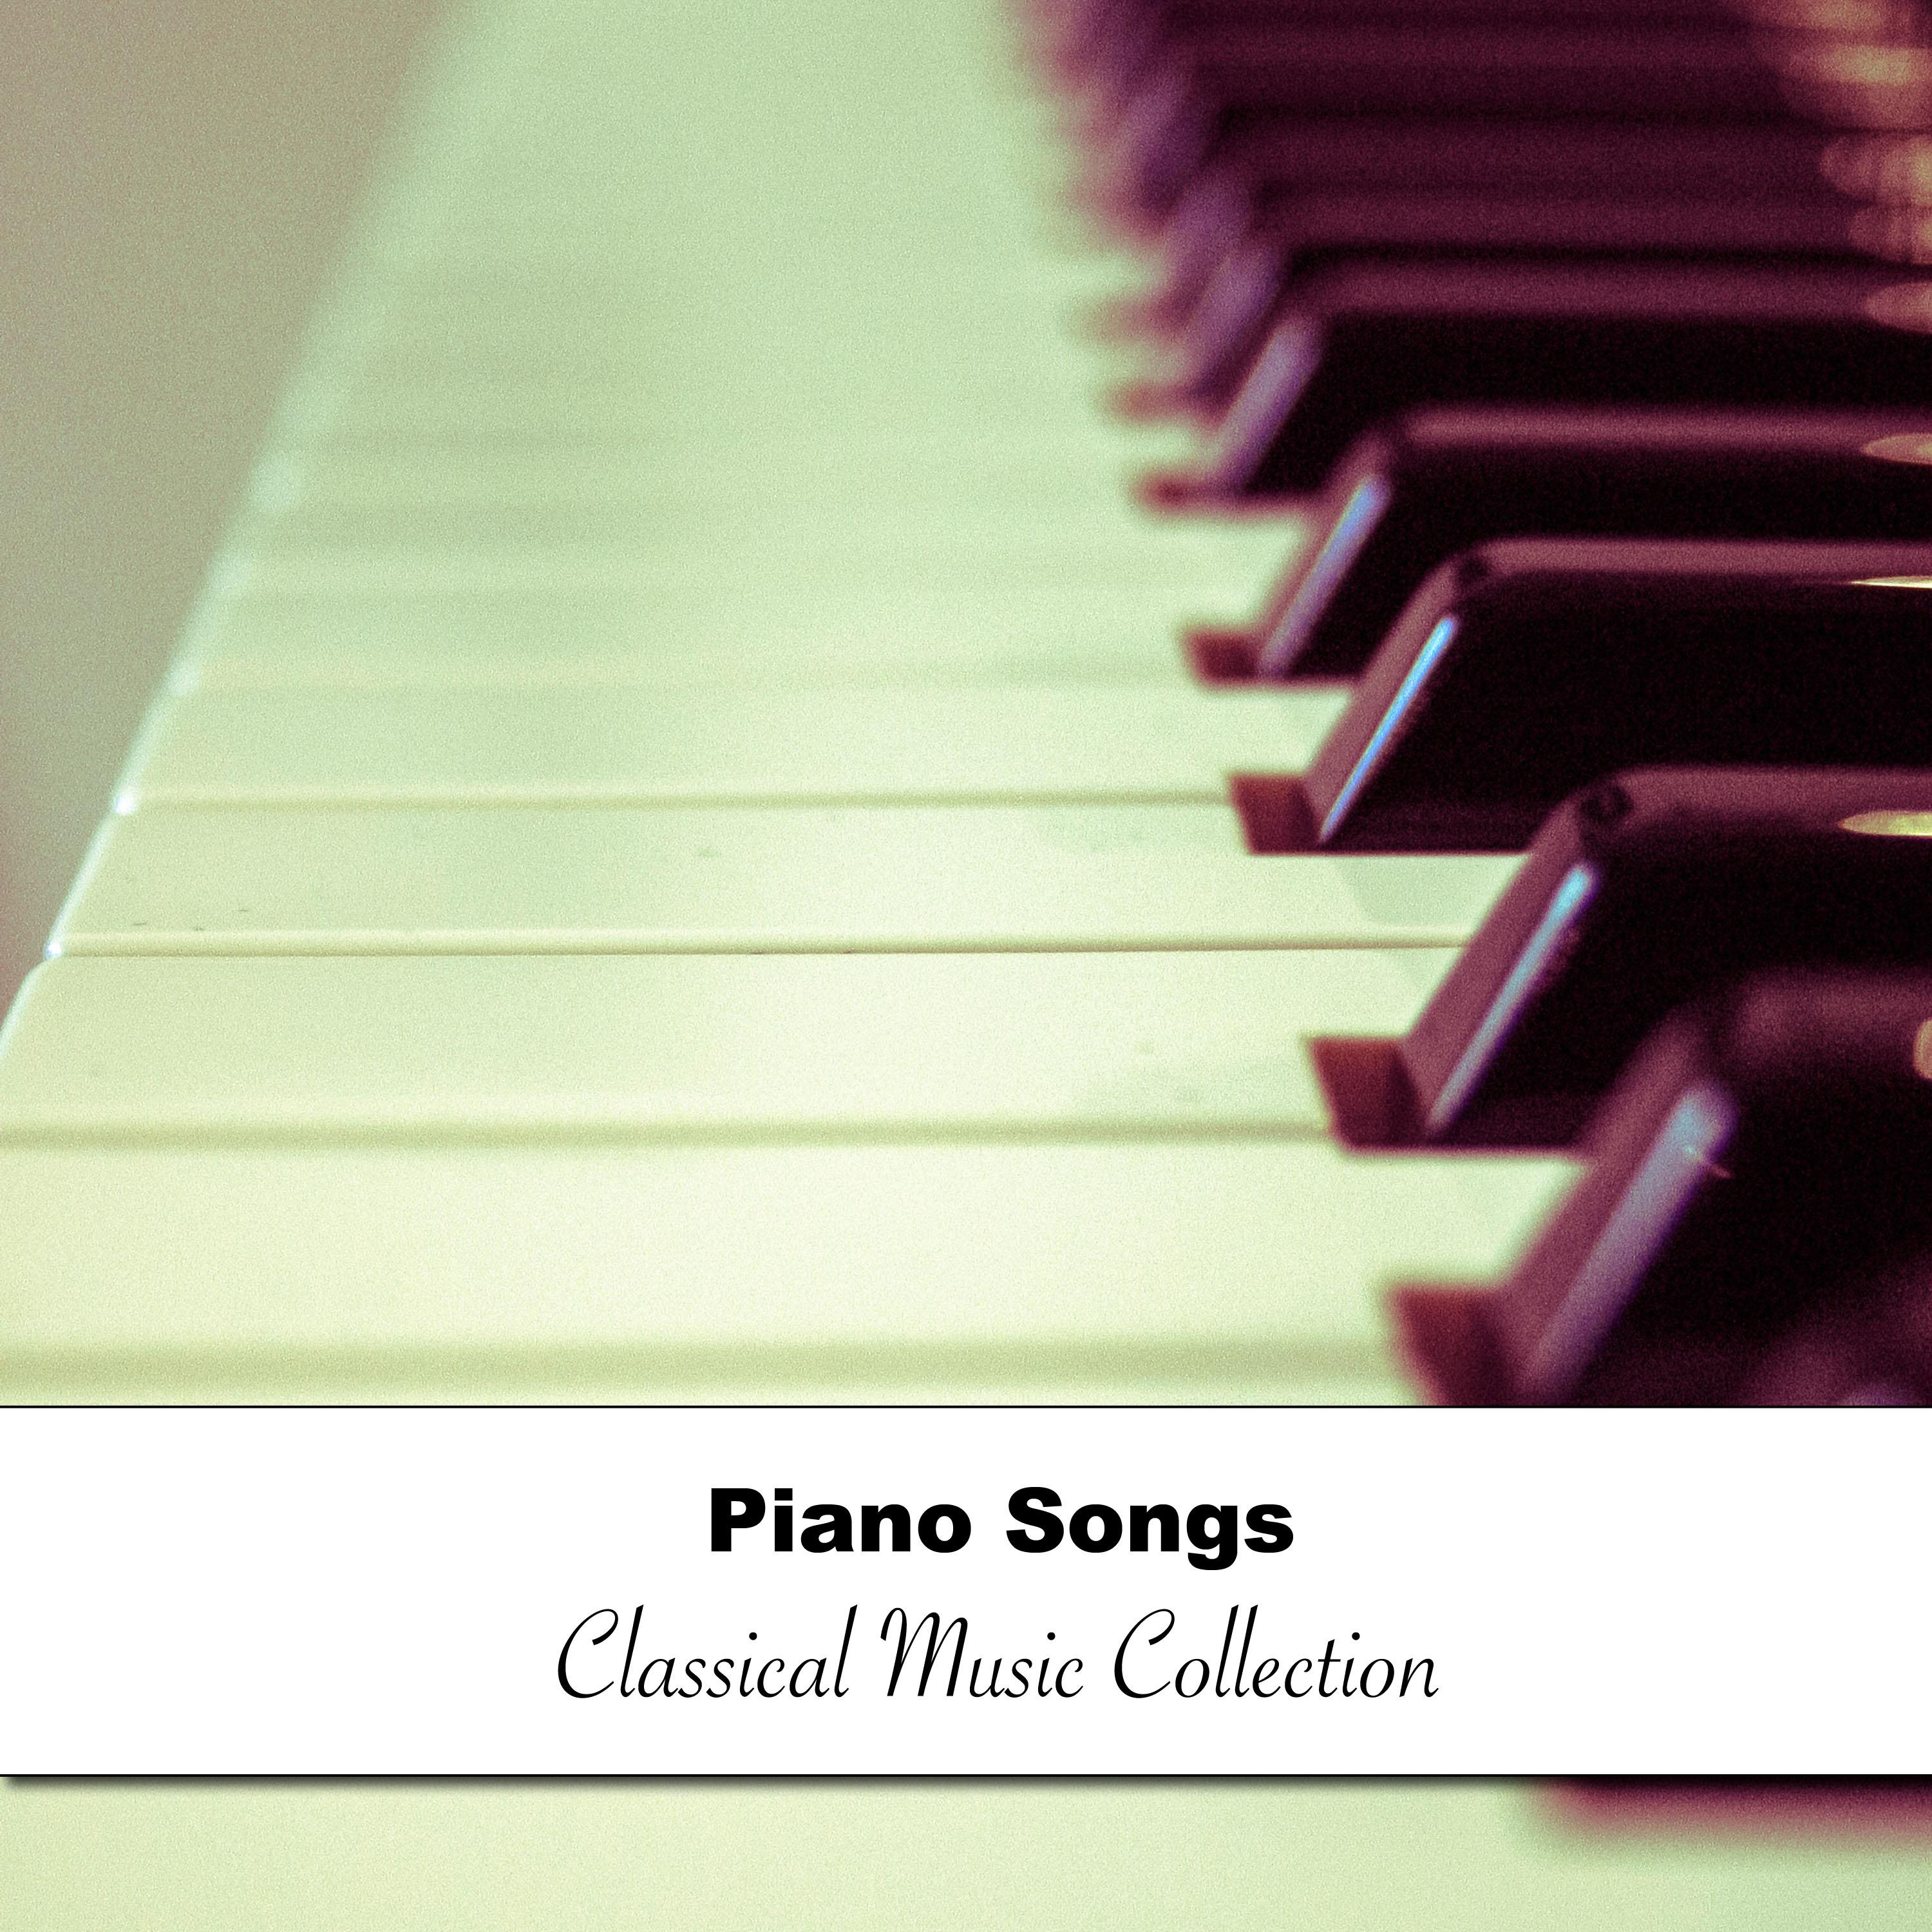 14 Wonderful Piano Songs: Classical Music Collection